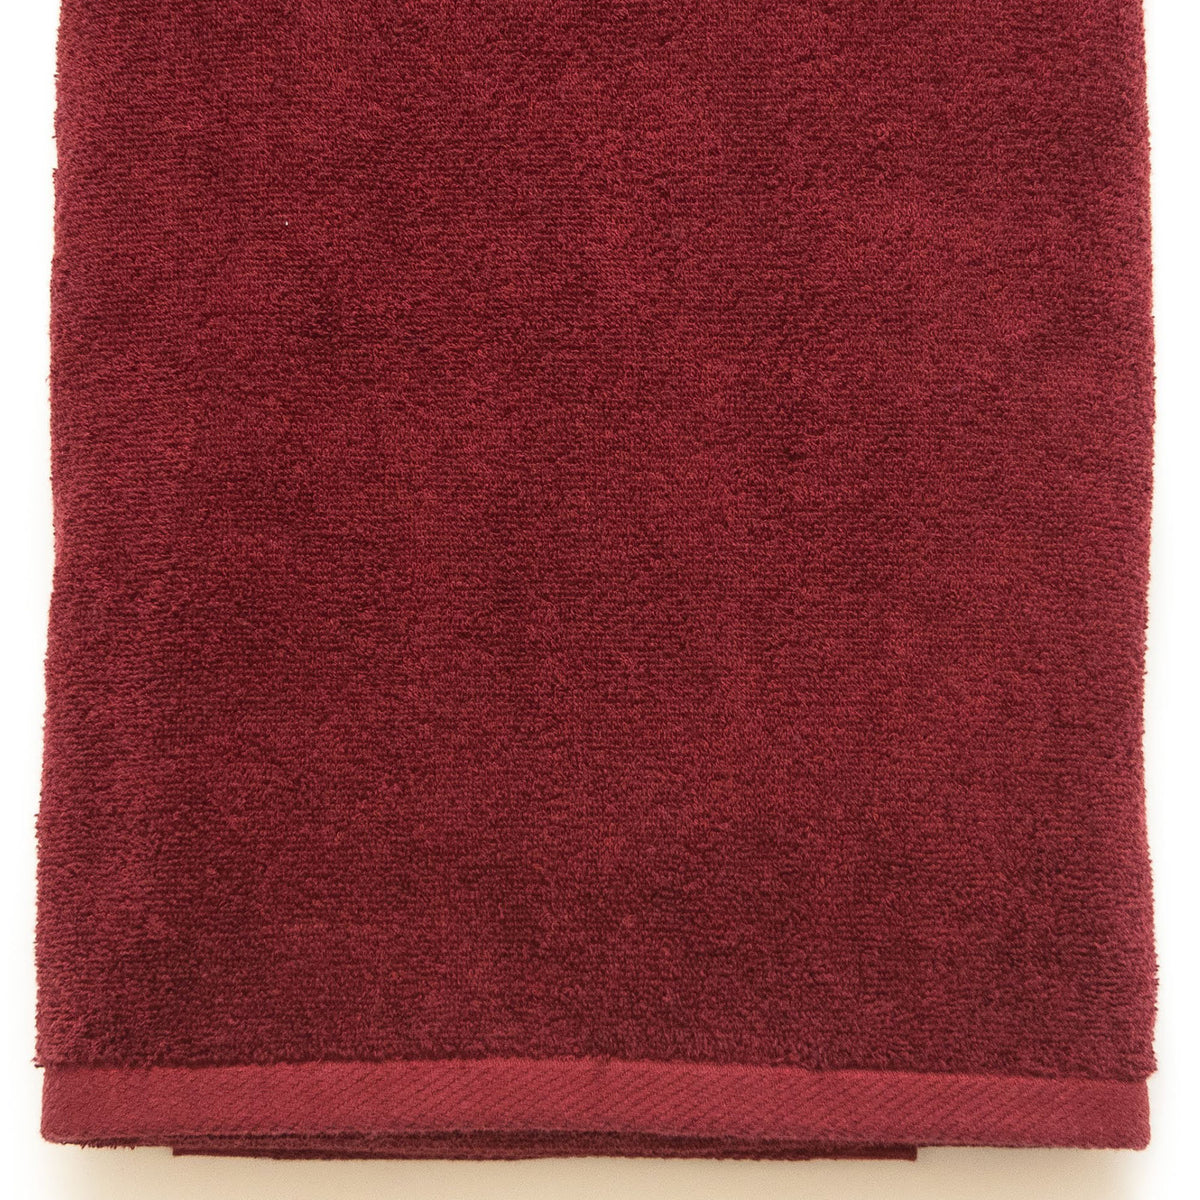 100% Cotton Beach &amp; Pool Towels - Red - American Blanket Company